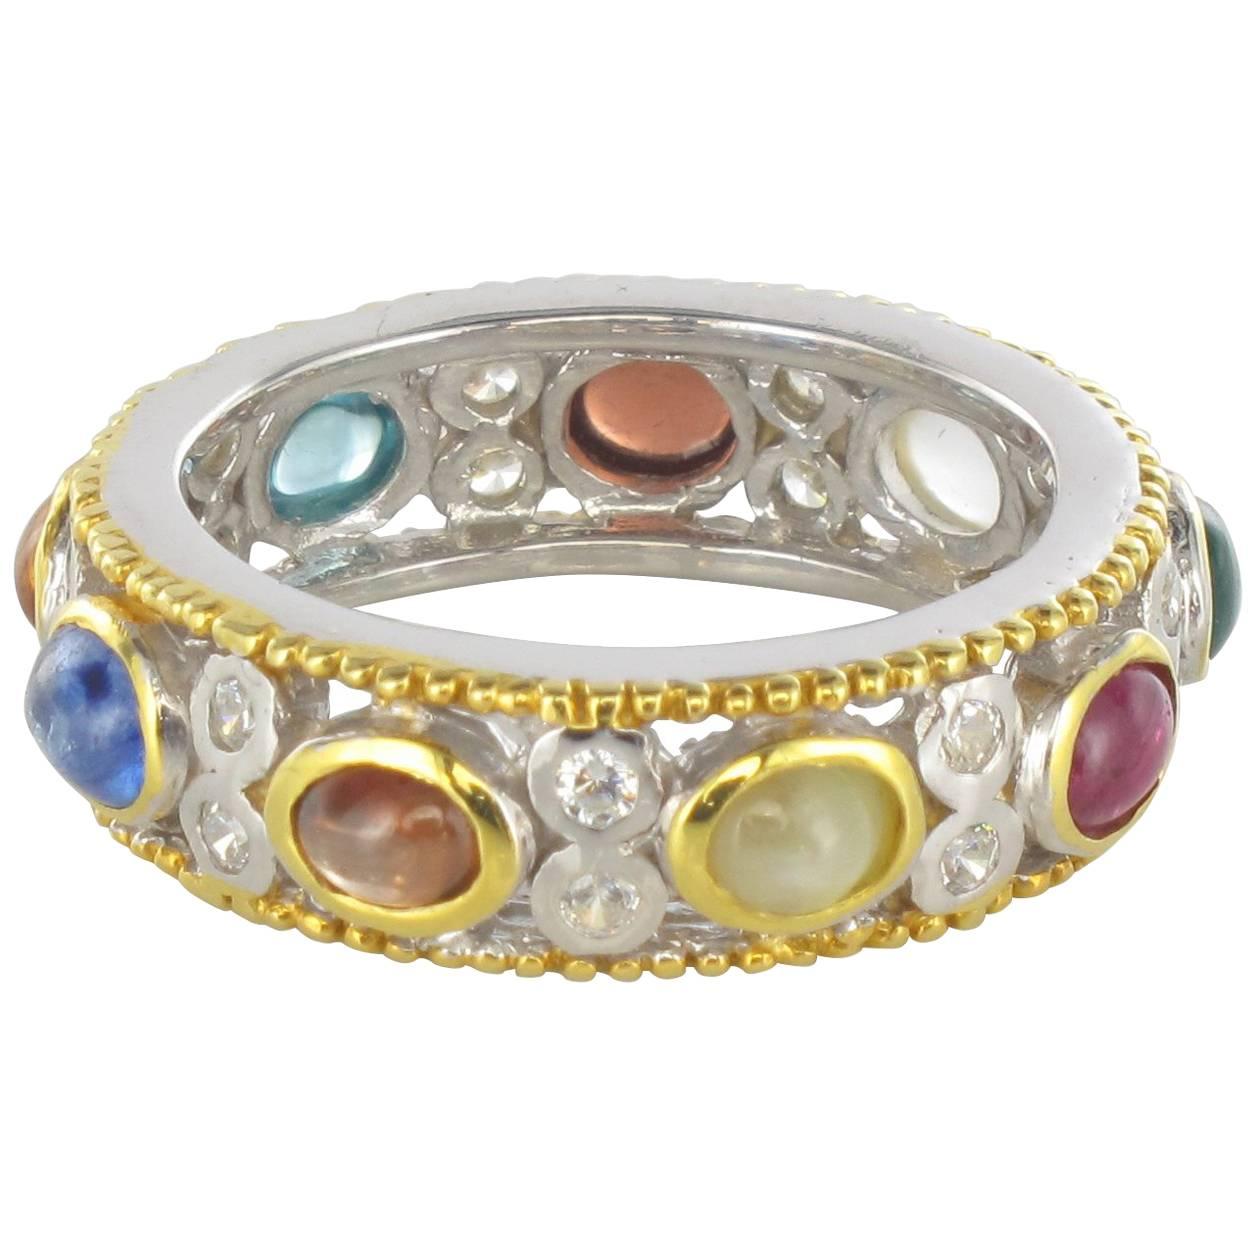 New White Brown Zircon Sapphire Ruby Agate Silver Band Ring